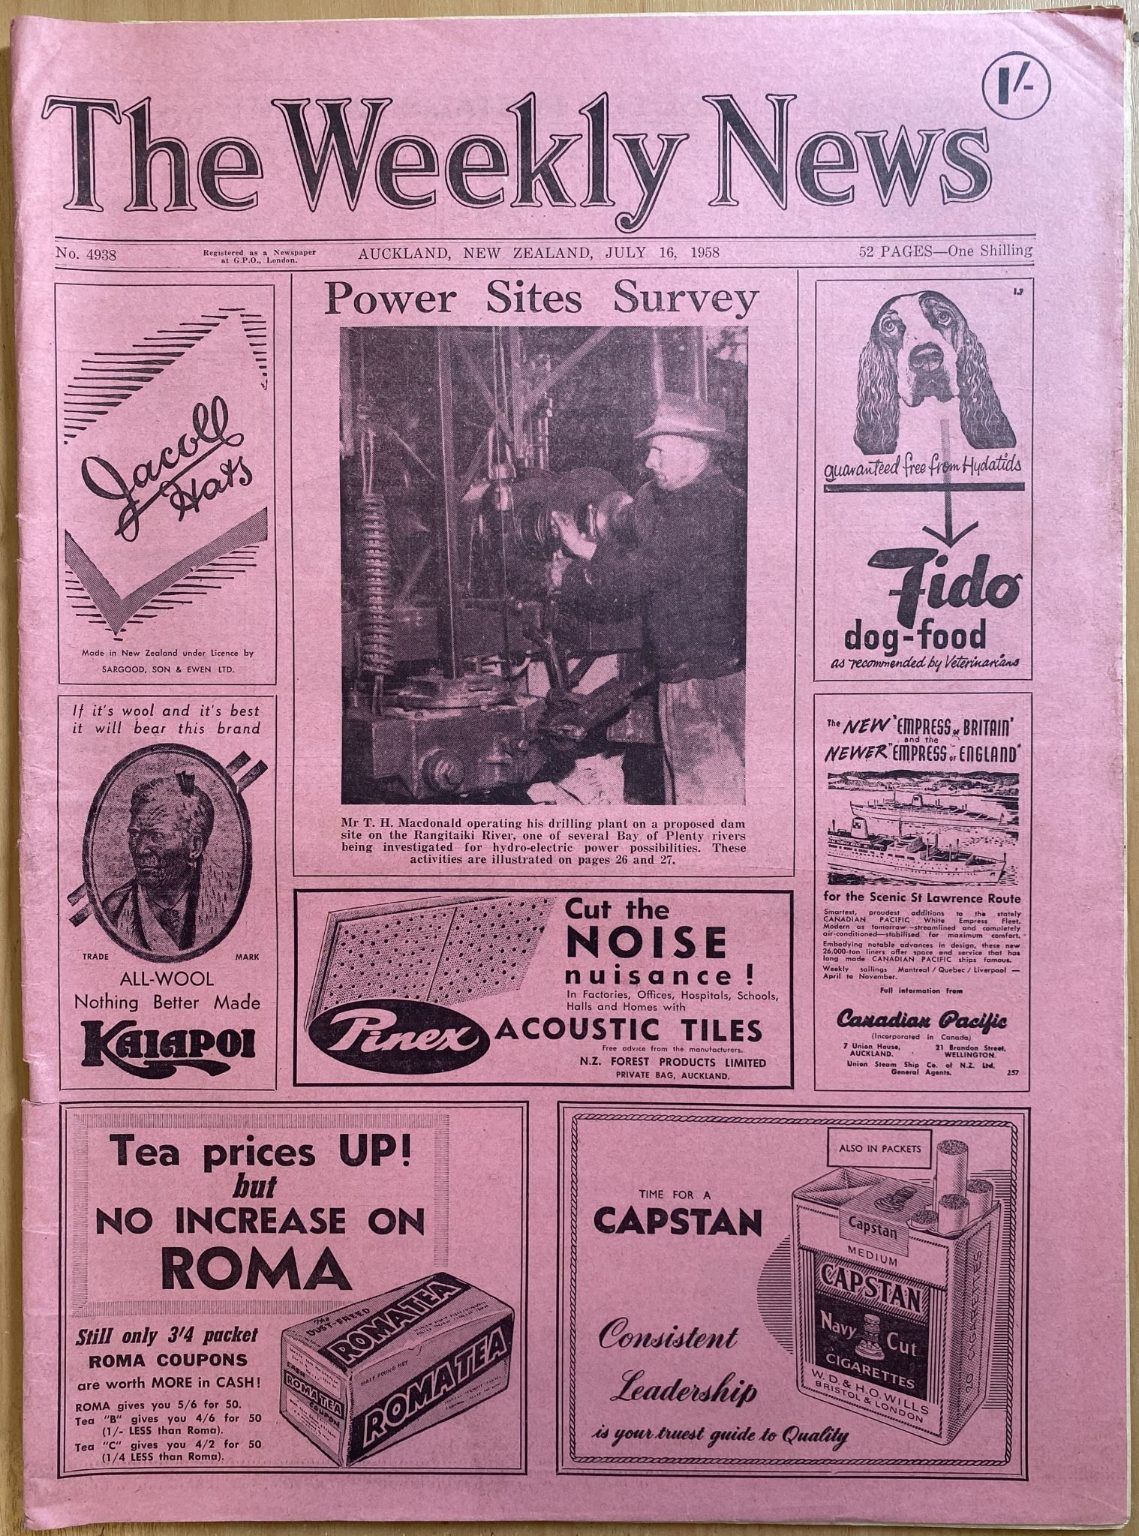 OLD NEWSPAPER: The Weekly News, No. 4938, 16 July 1958